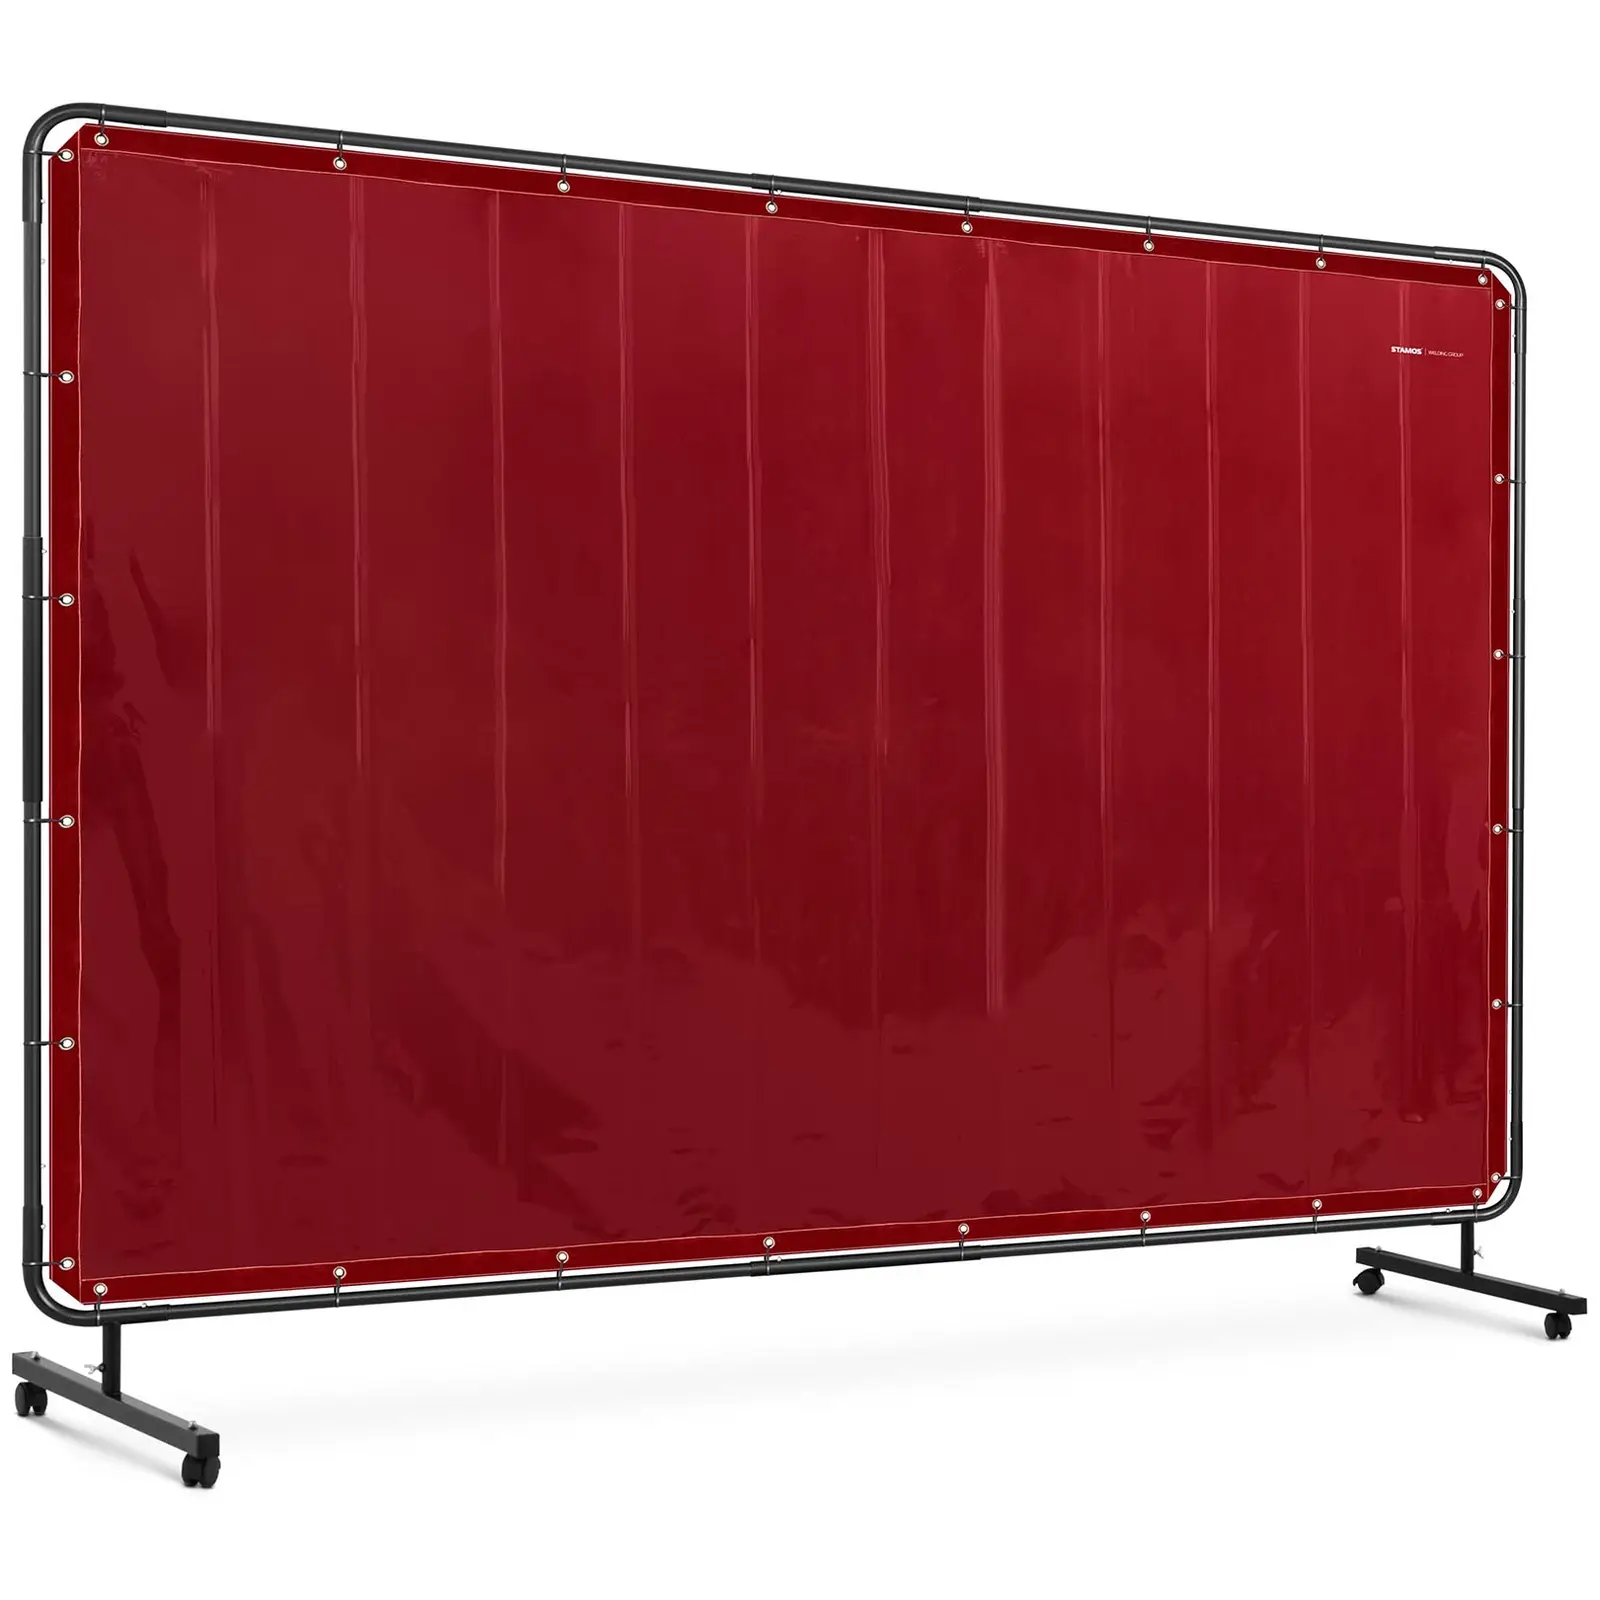 Welding Screen - with frame - 240 x 180 cm